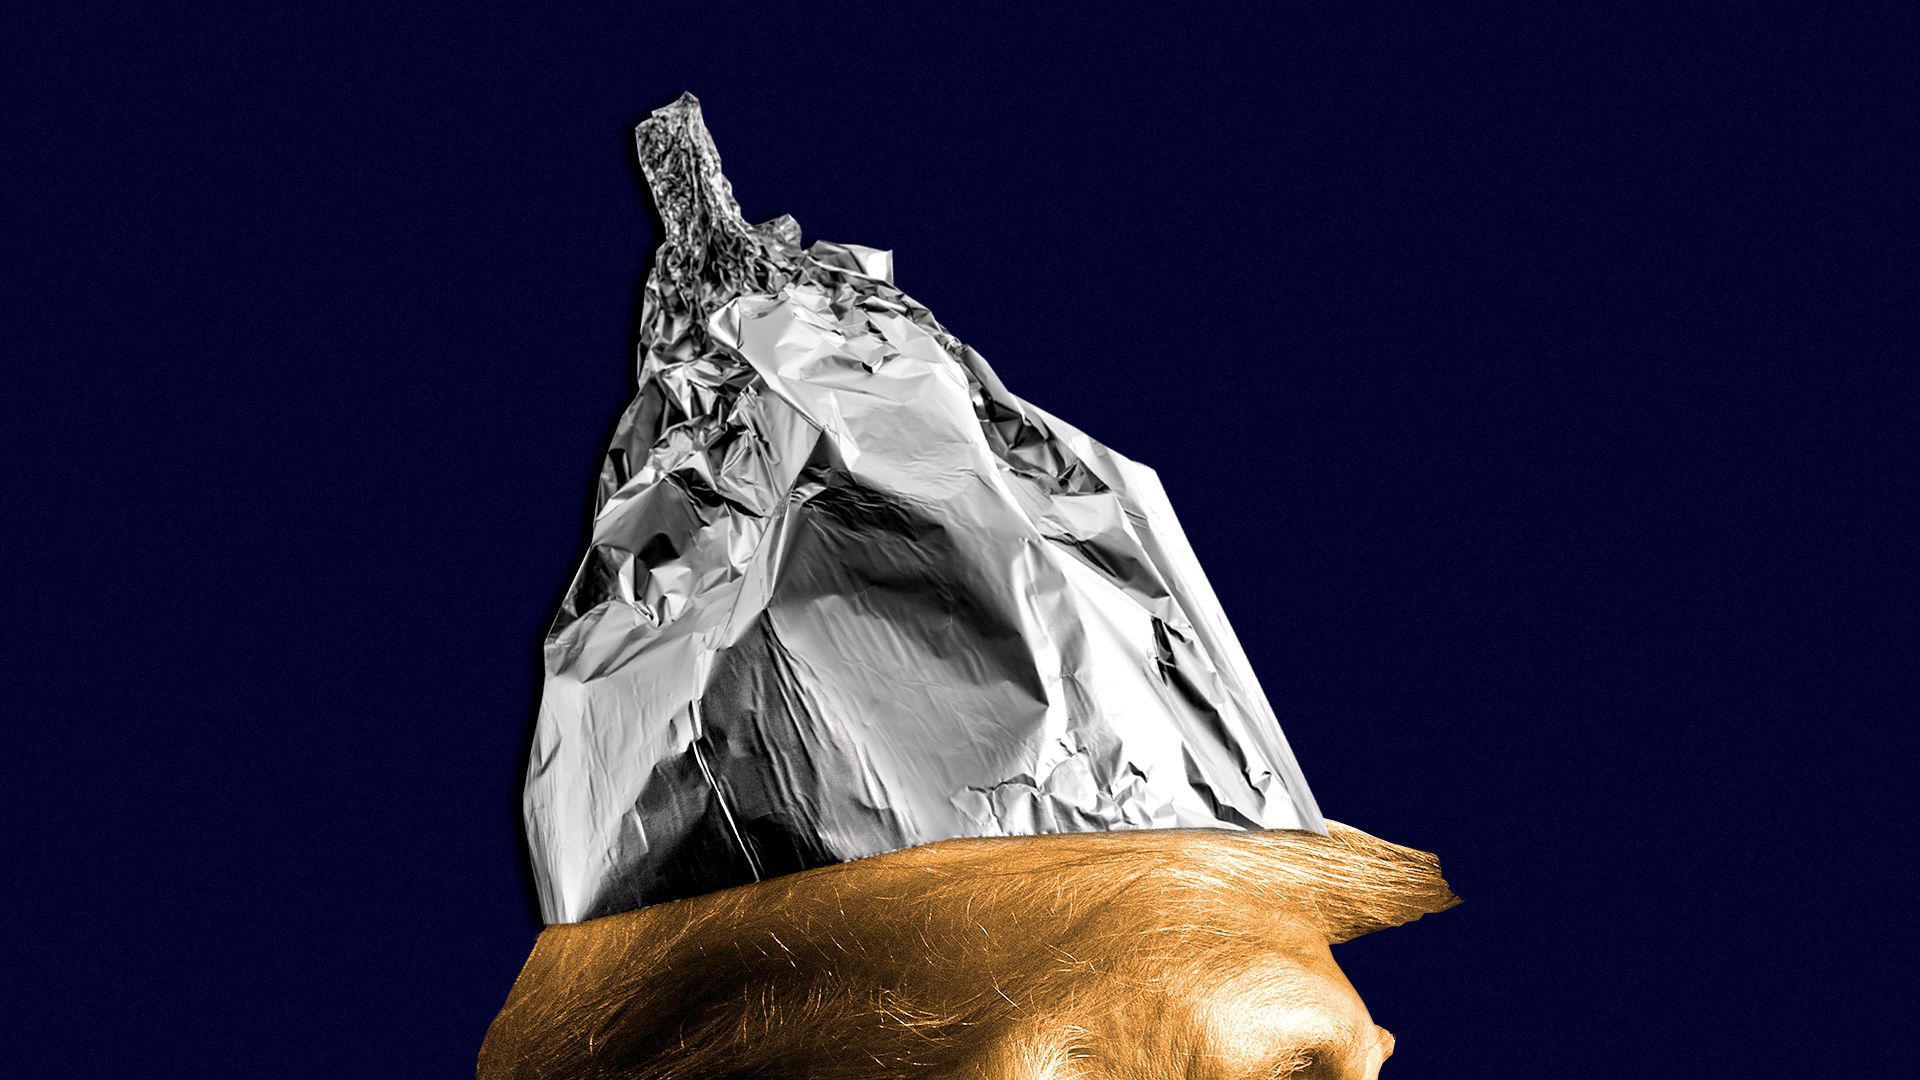 Illustration of President Trump wearing a tin foil hat